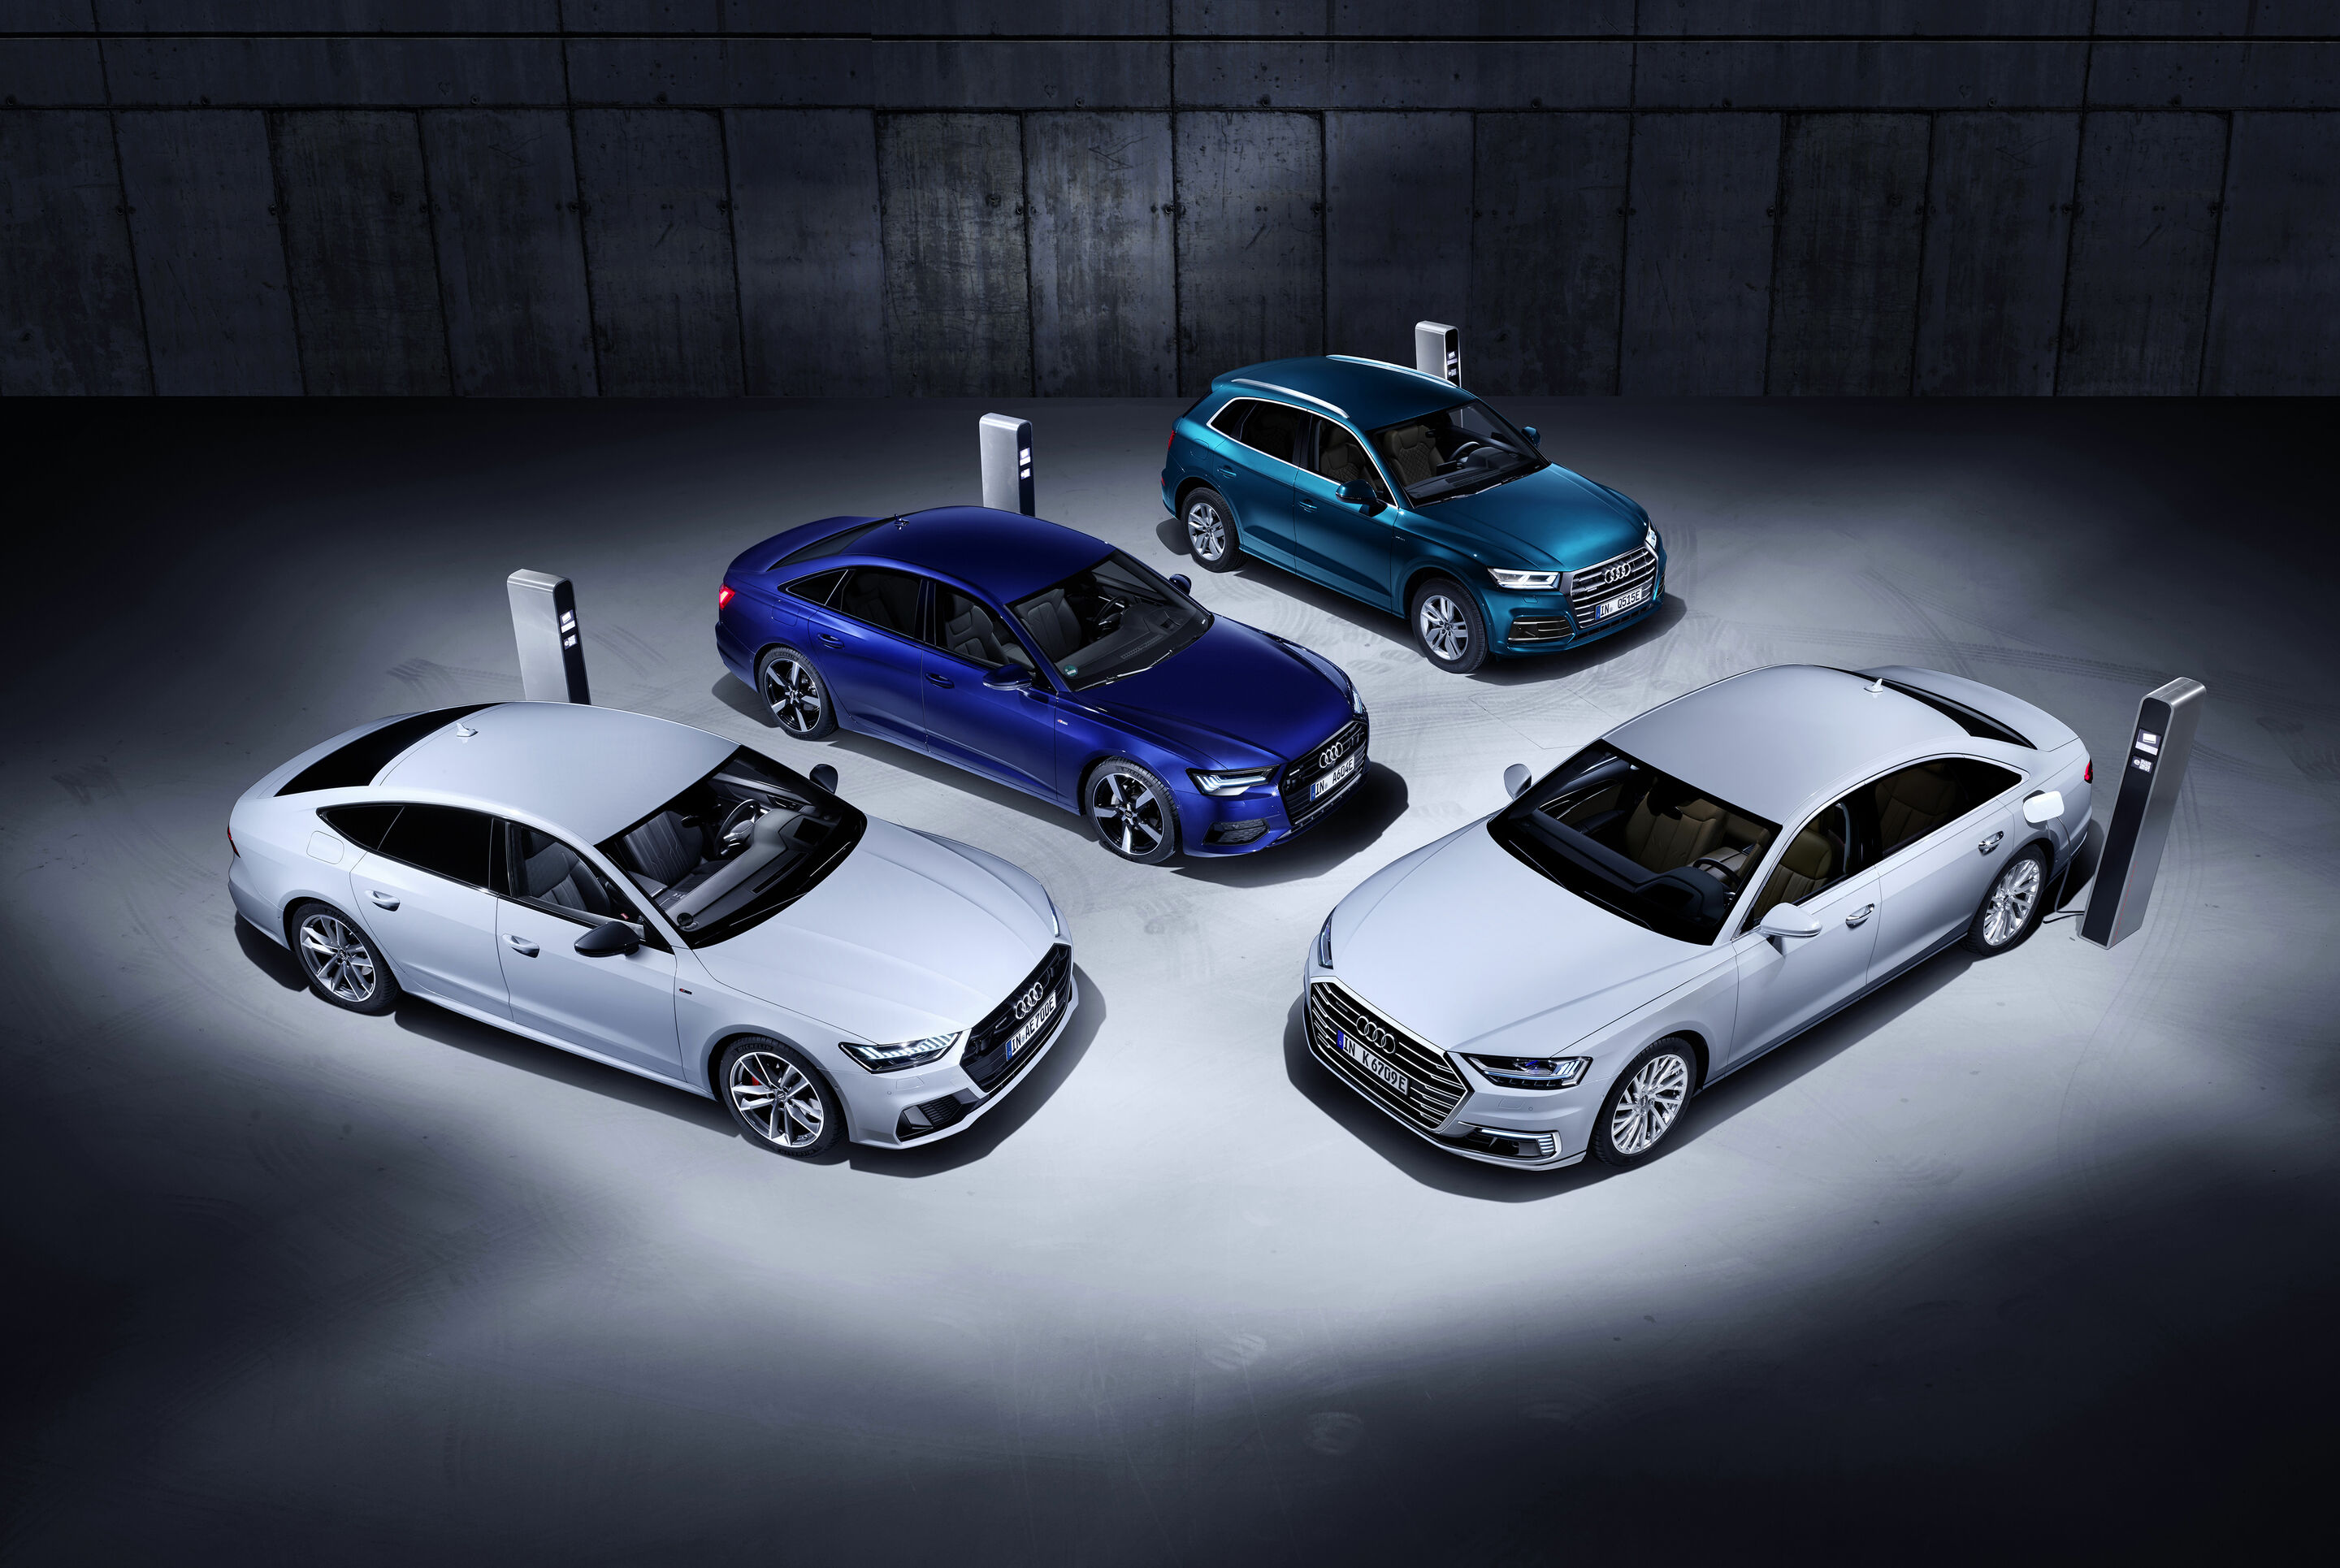 Electric Super-Sedans, Audi Sport Plug-In Hybrids, and More of